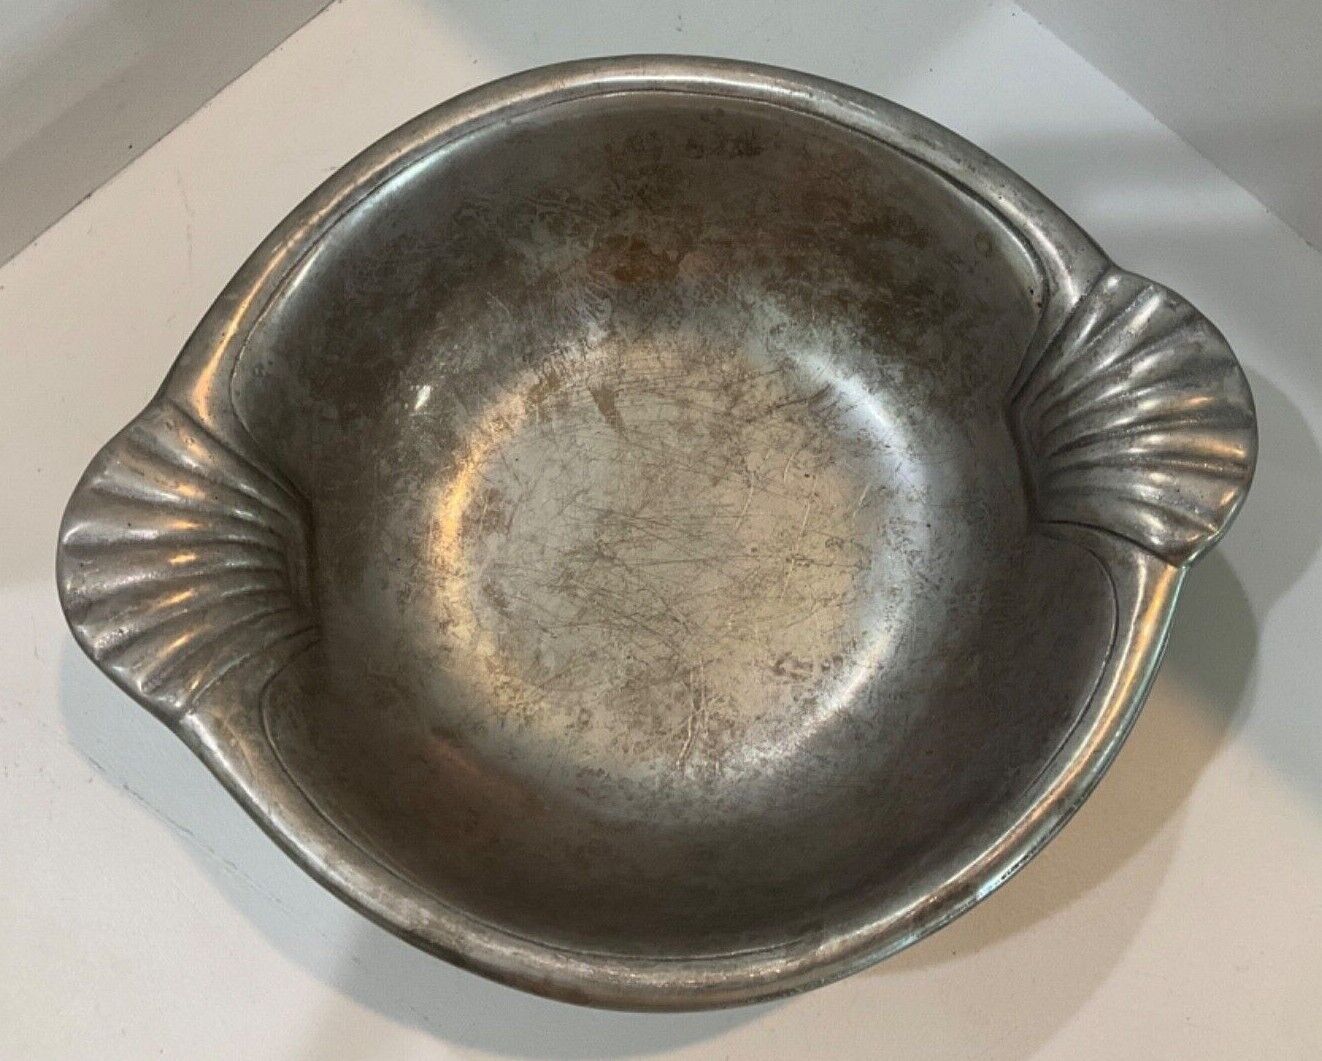 The Wilton Co Heavyweight Pewter Bowl Serving Dish Approx 9.75 X 8.25 Inches RD1